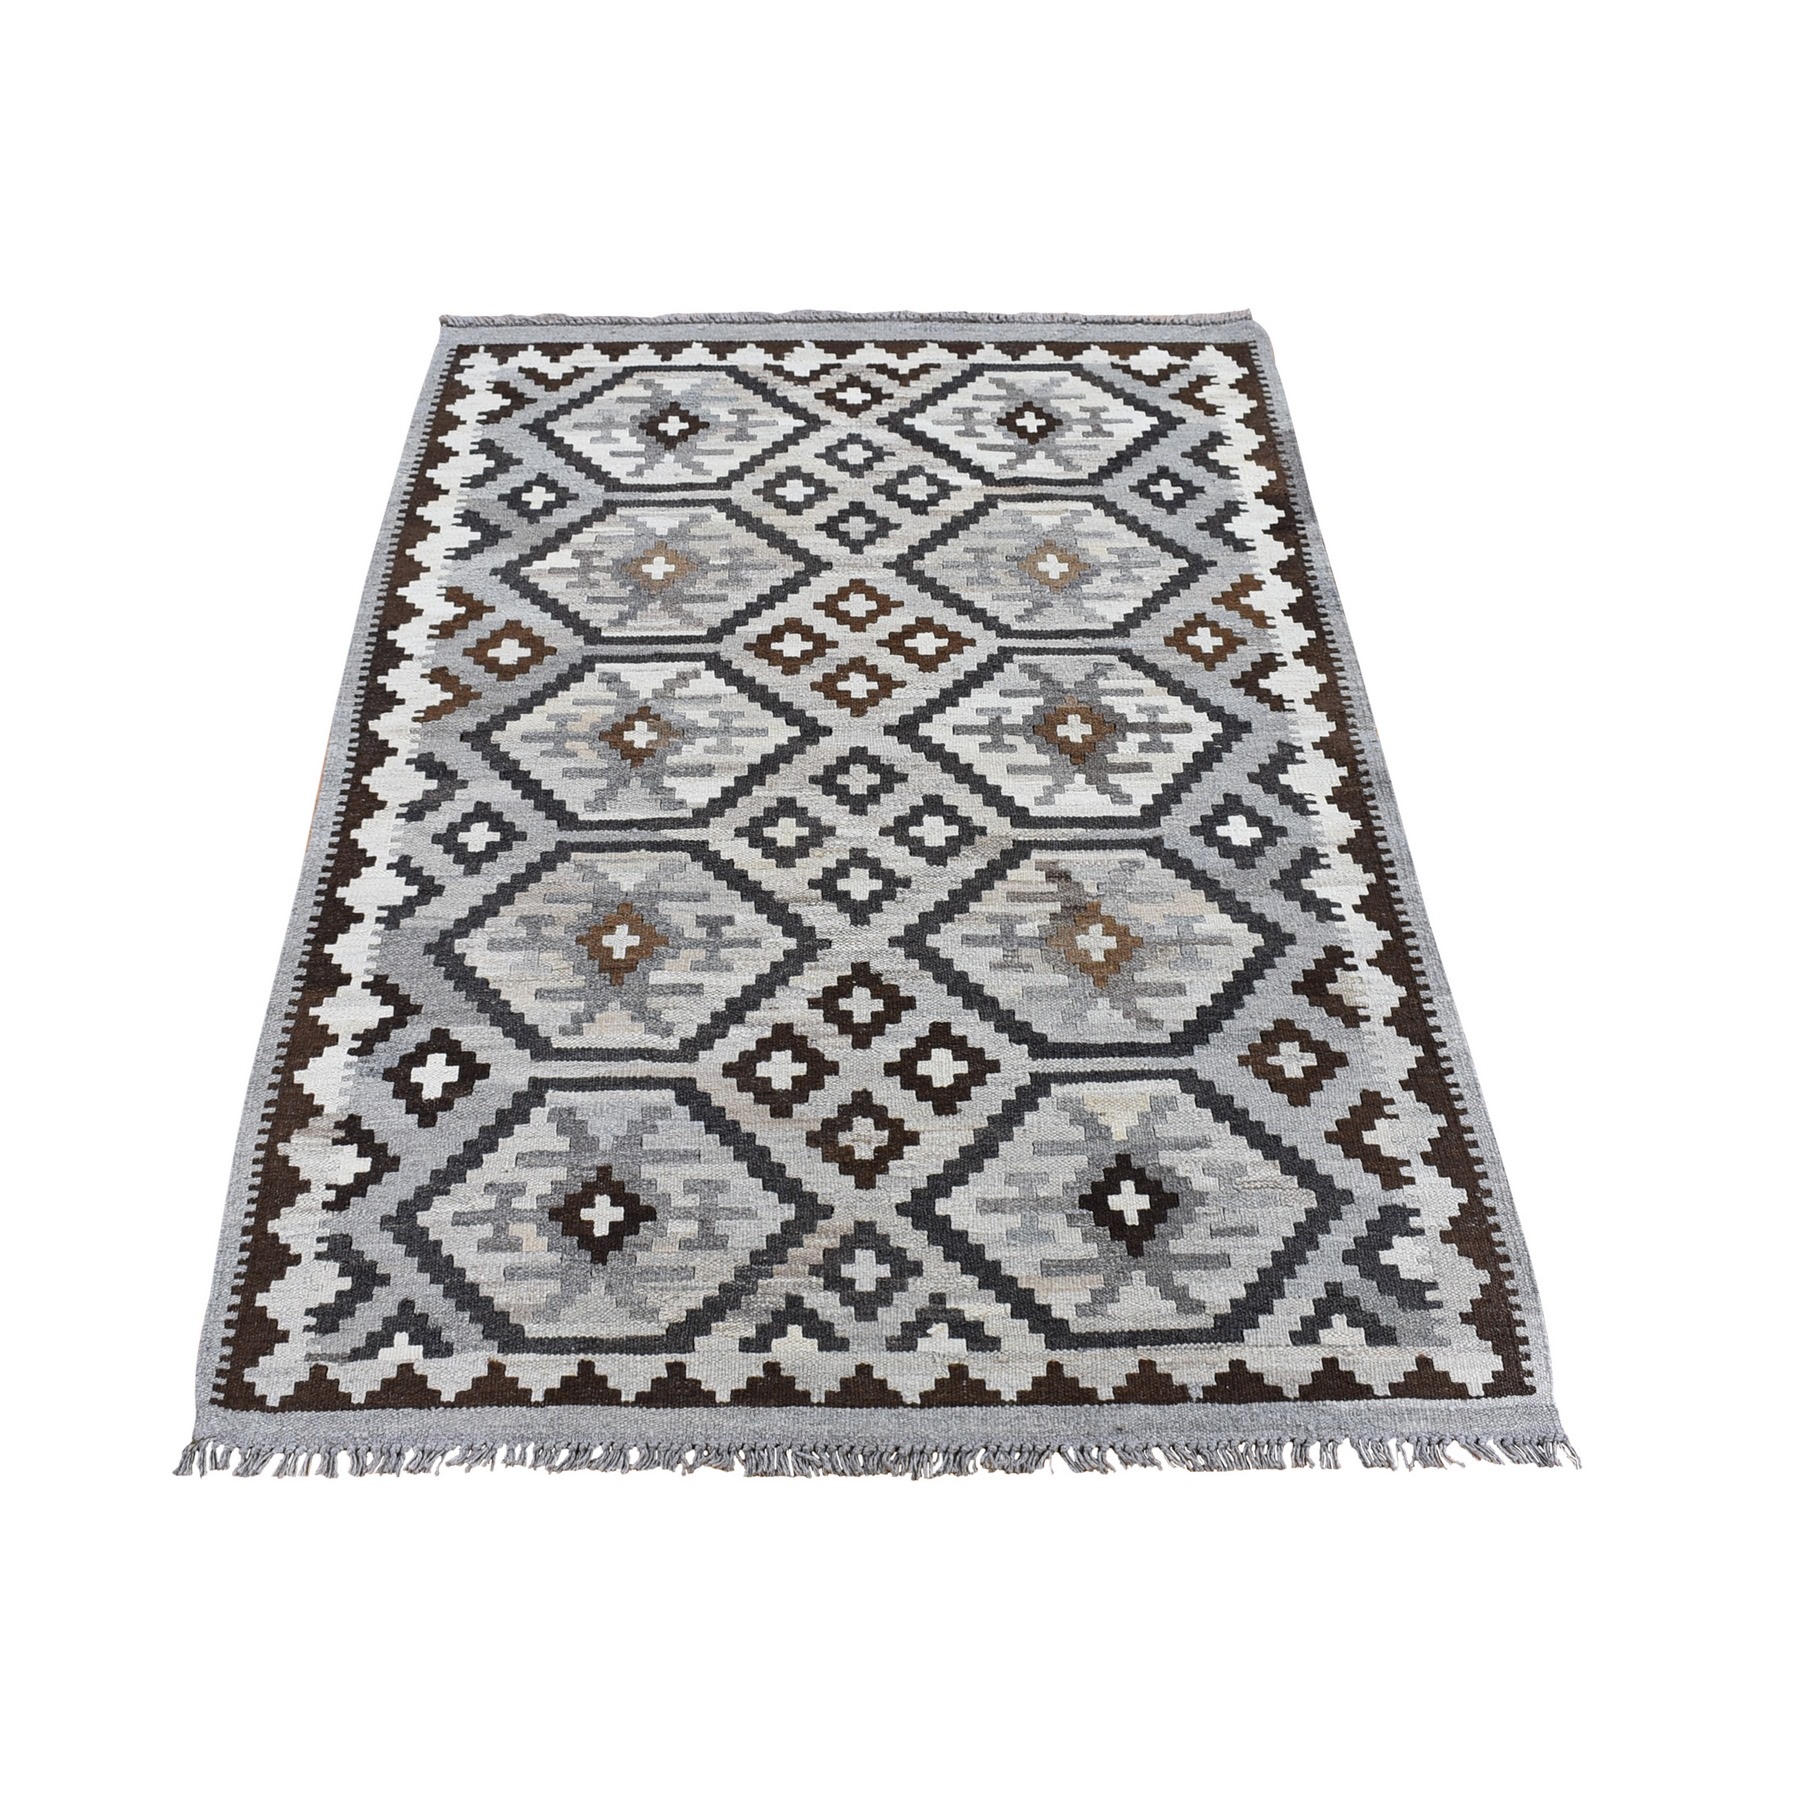 Fine Kilim Collection Hand Woven Ivory Rug No: 1132410